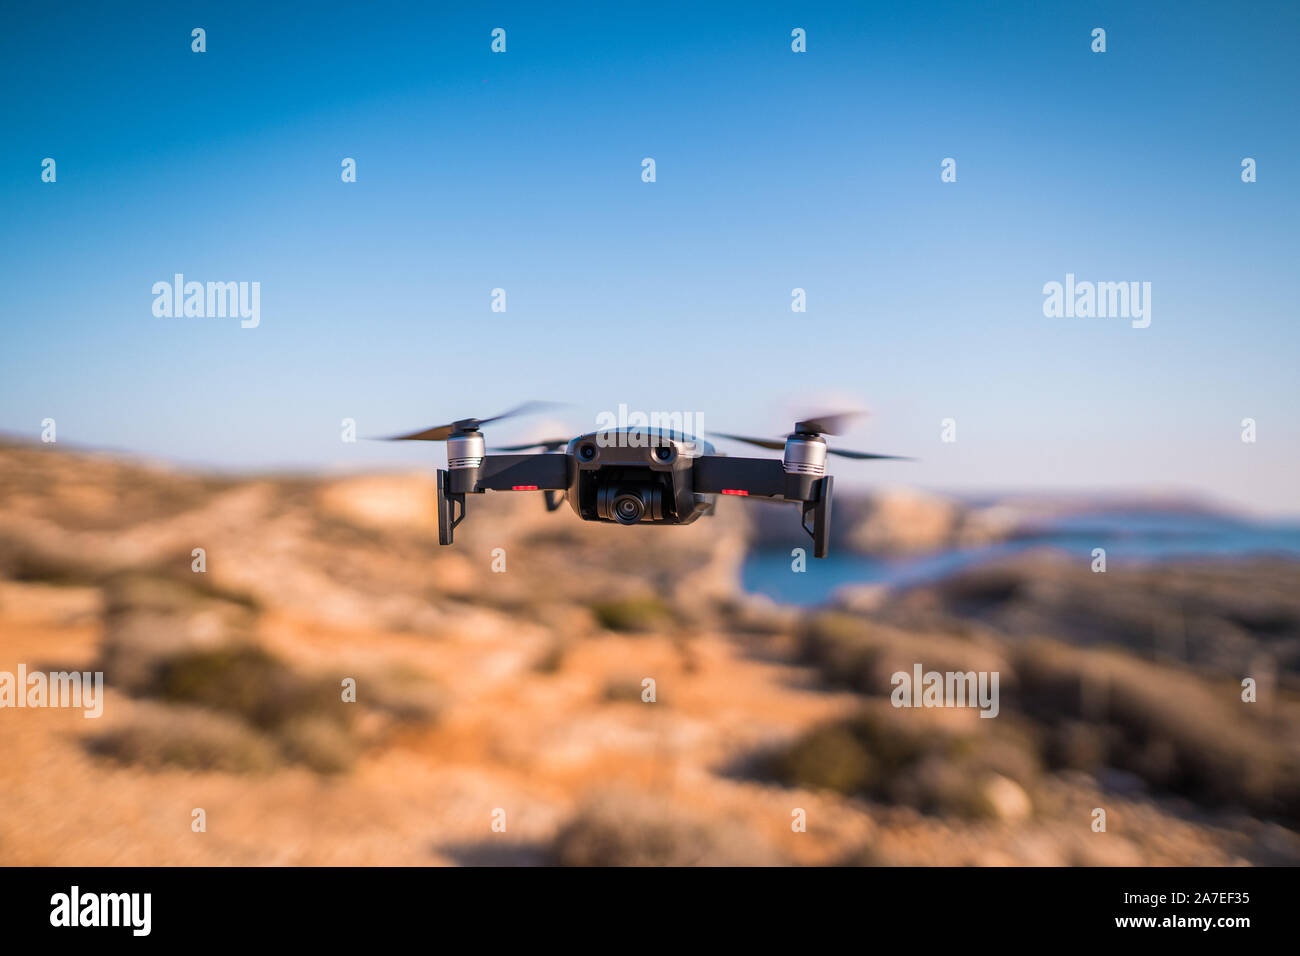 Drone Hovering Travel Location Coastal Photography Equipment Quadrocopter New Stock Photo